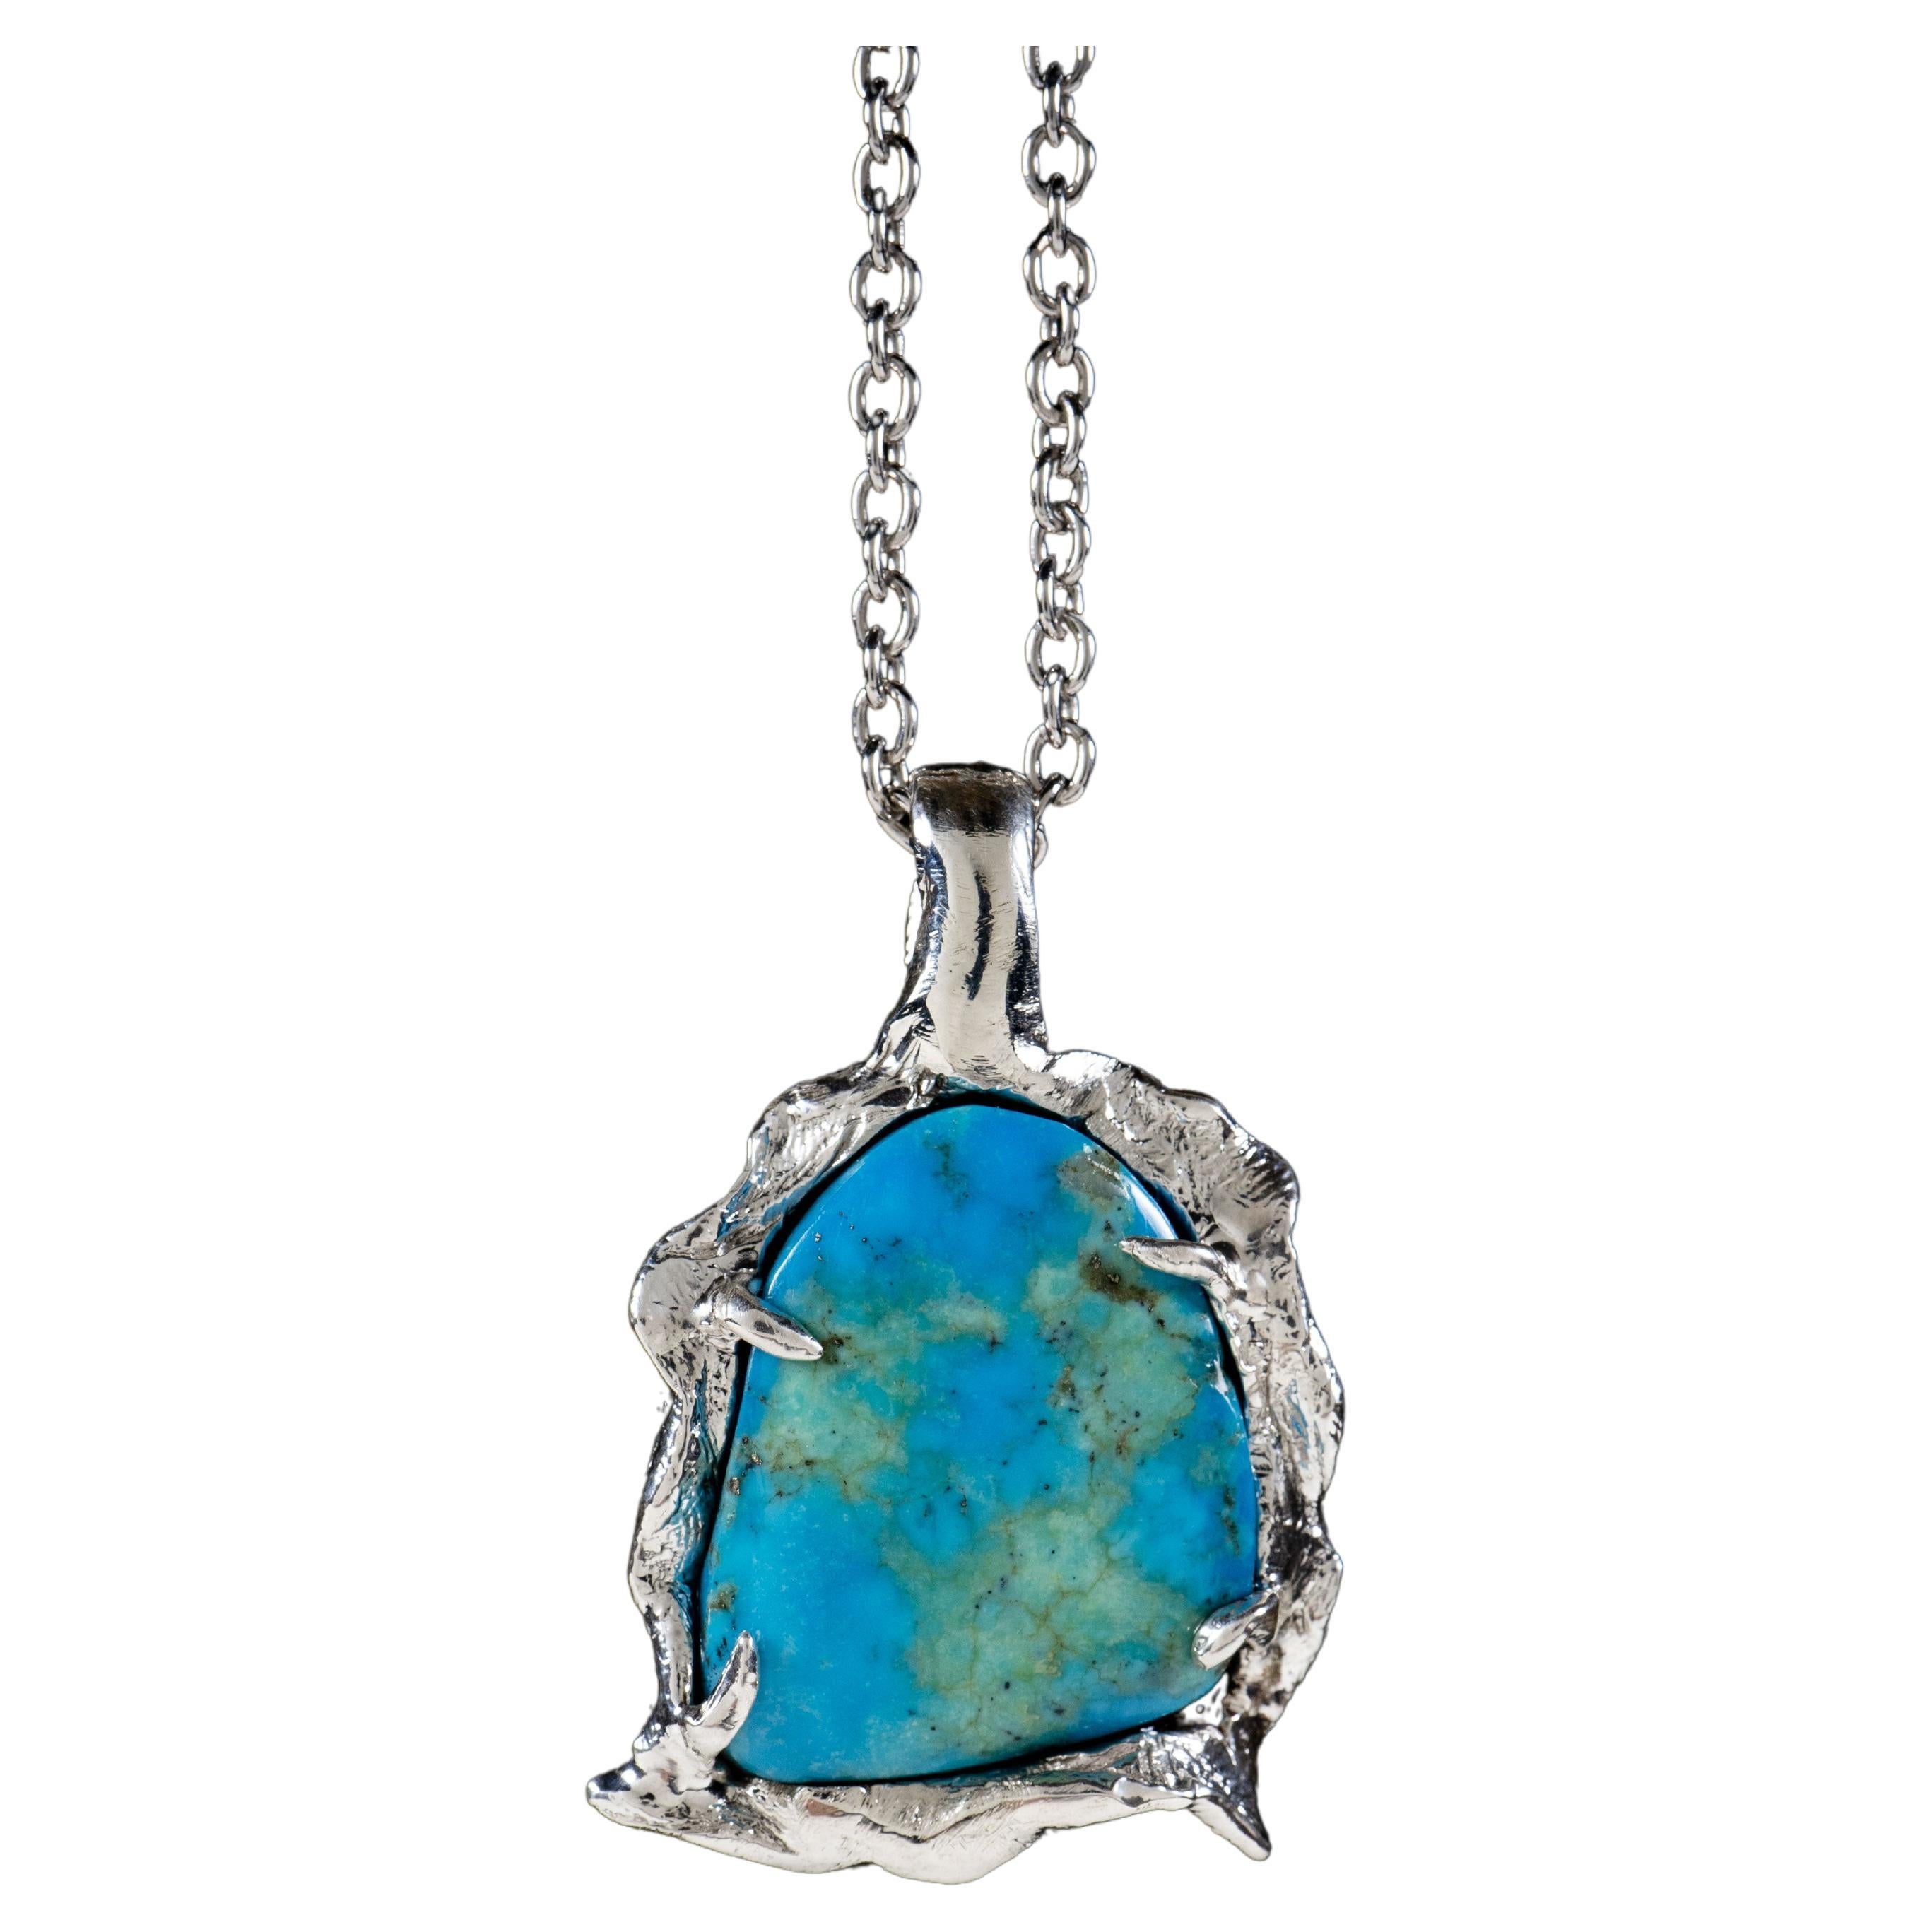 Water (Turquoise, Sterling Silver Pendant) by Ken Fury